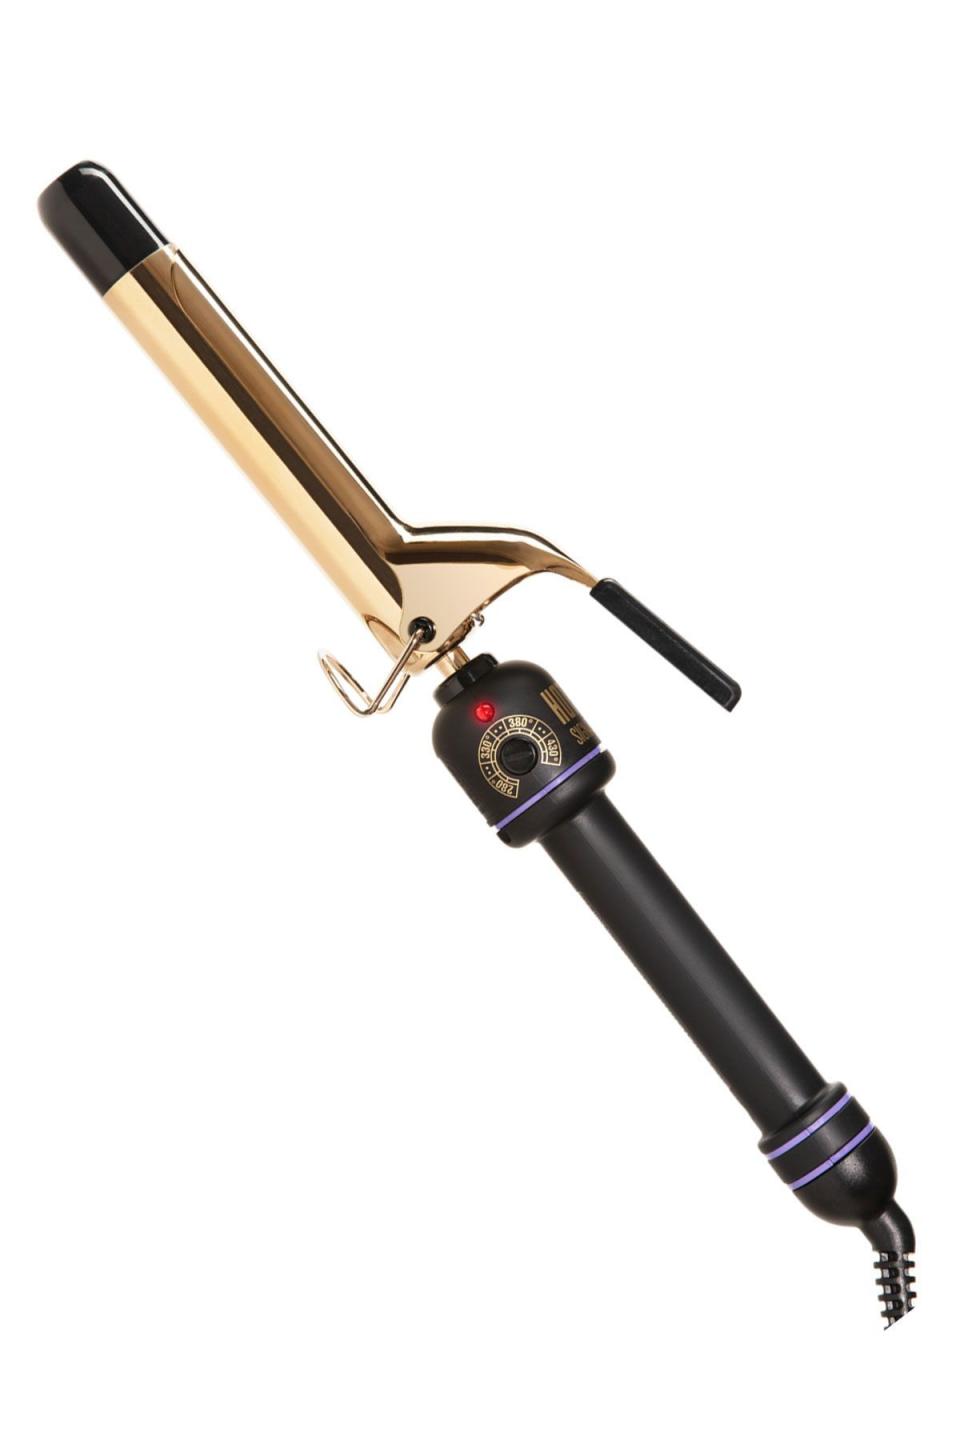 Signature Series Gold Curling Iron/Wand, 1.25 Inch